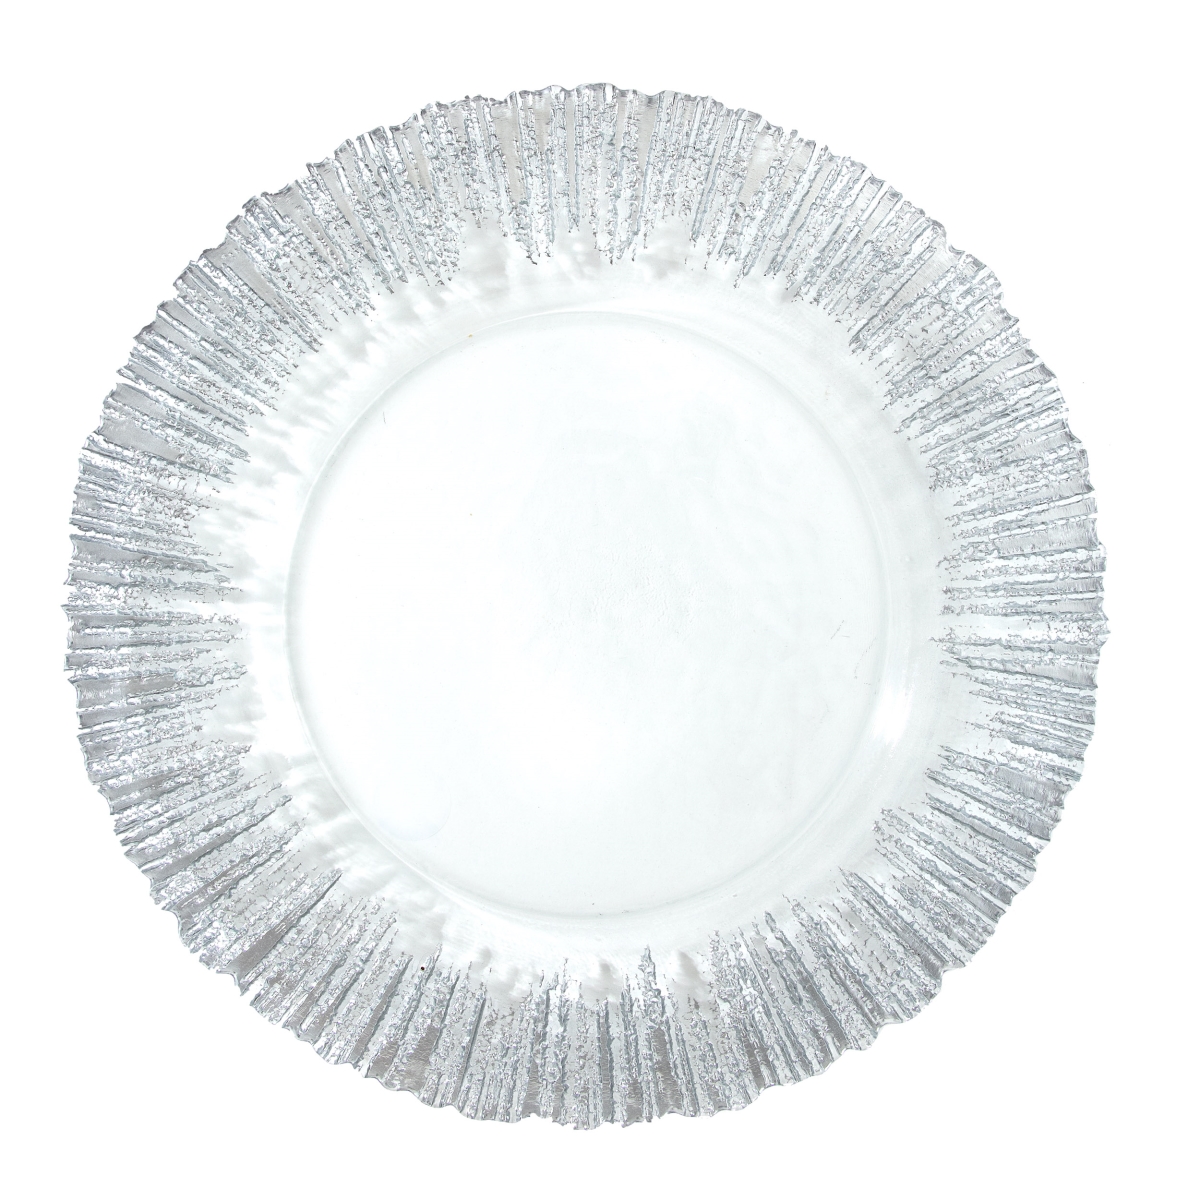 31114 13 In. Sunburst Charger Plate, Silver & Clear - Set Of 4